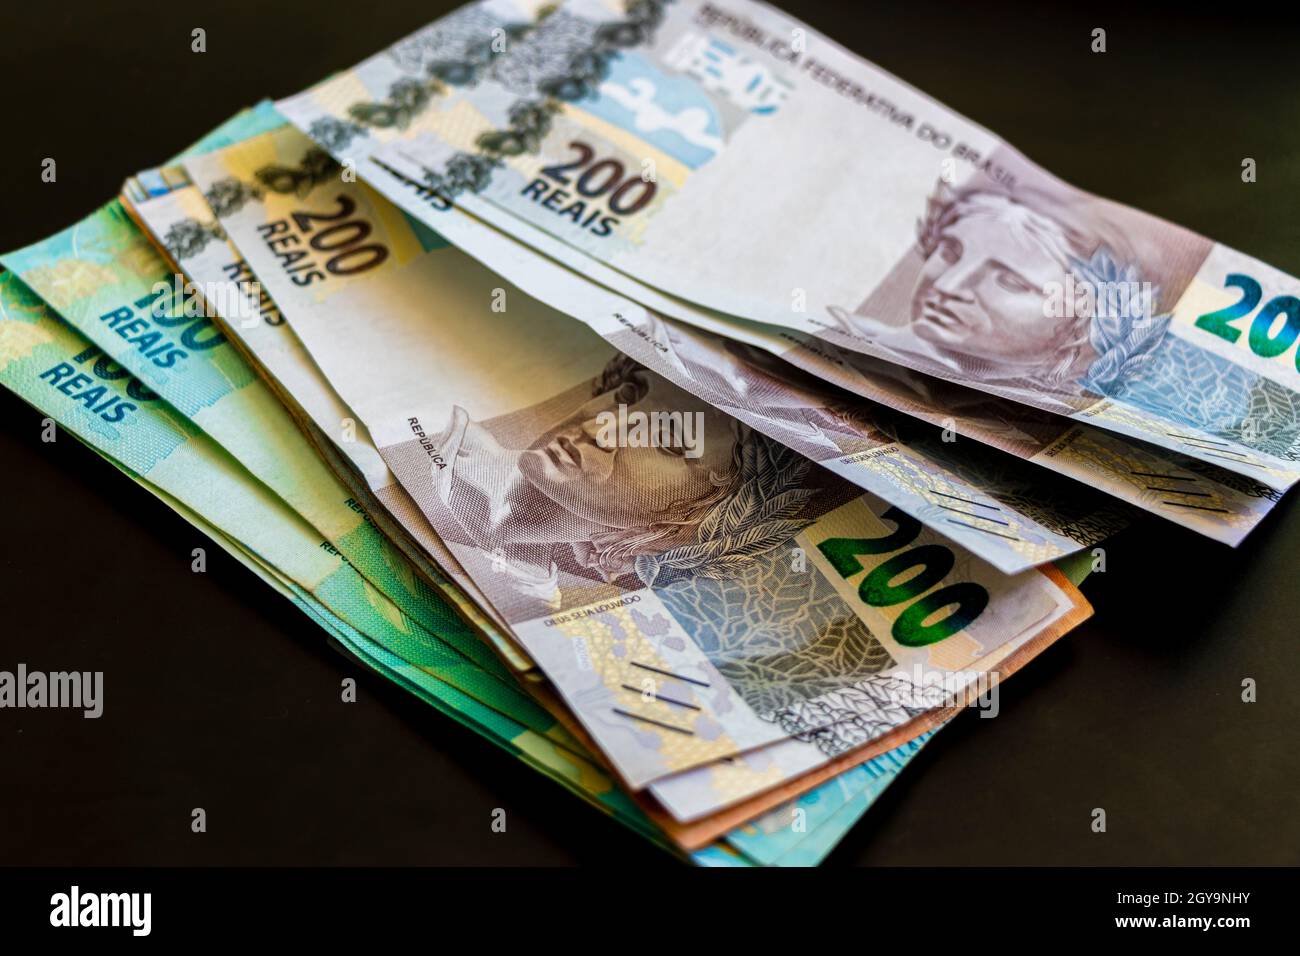 Real: the Brazilian currency